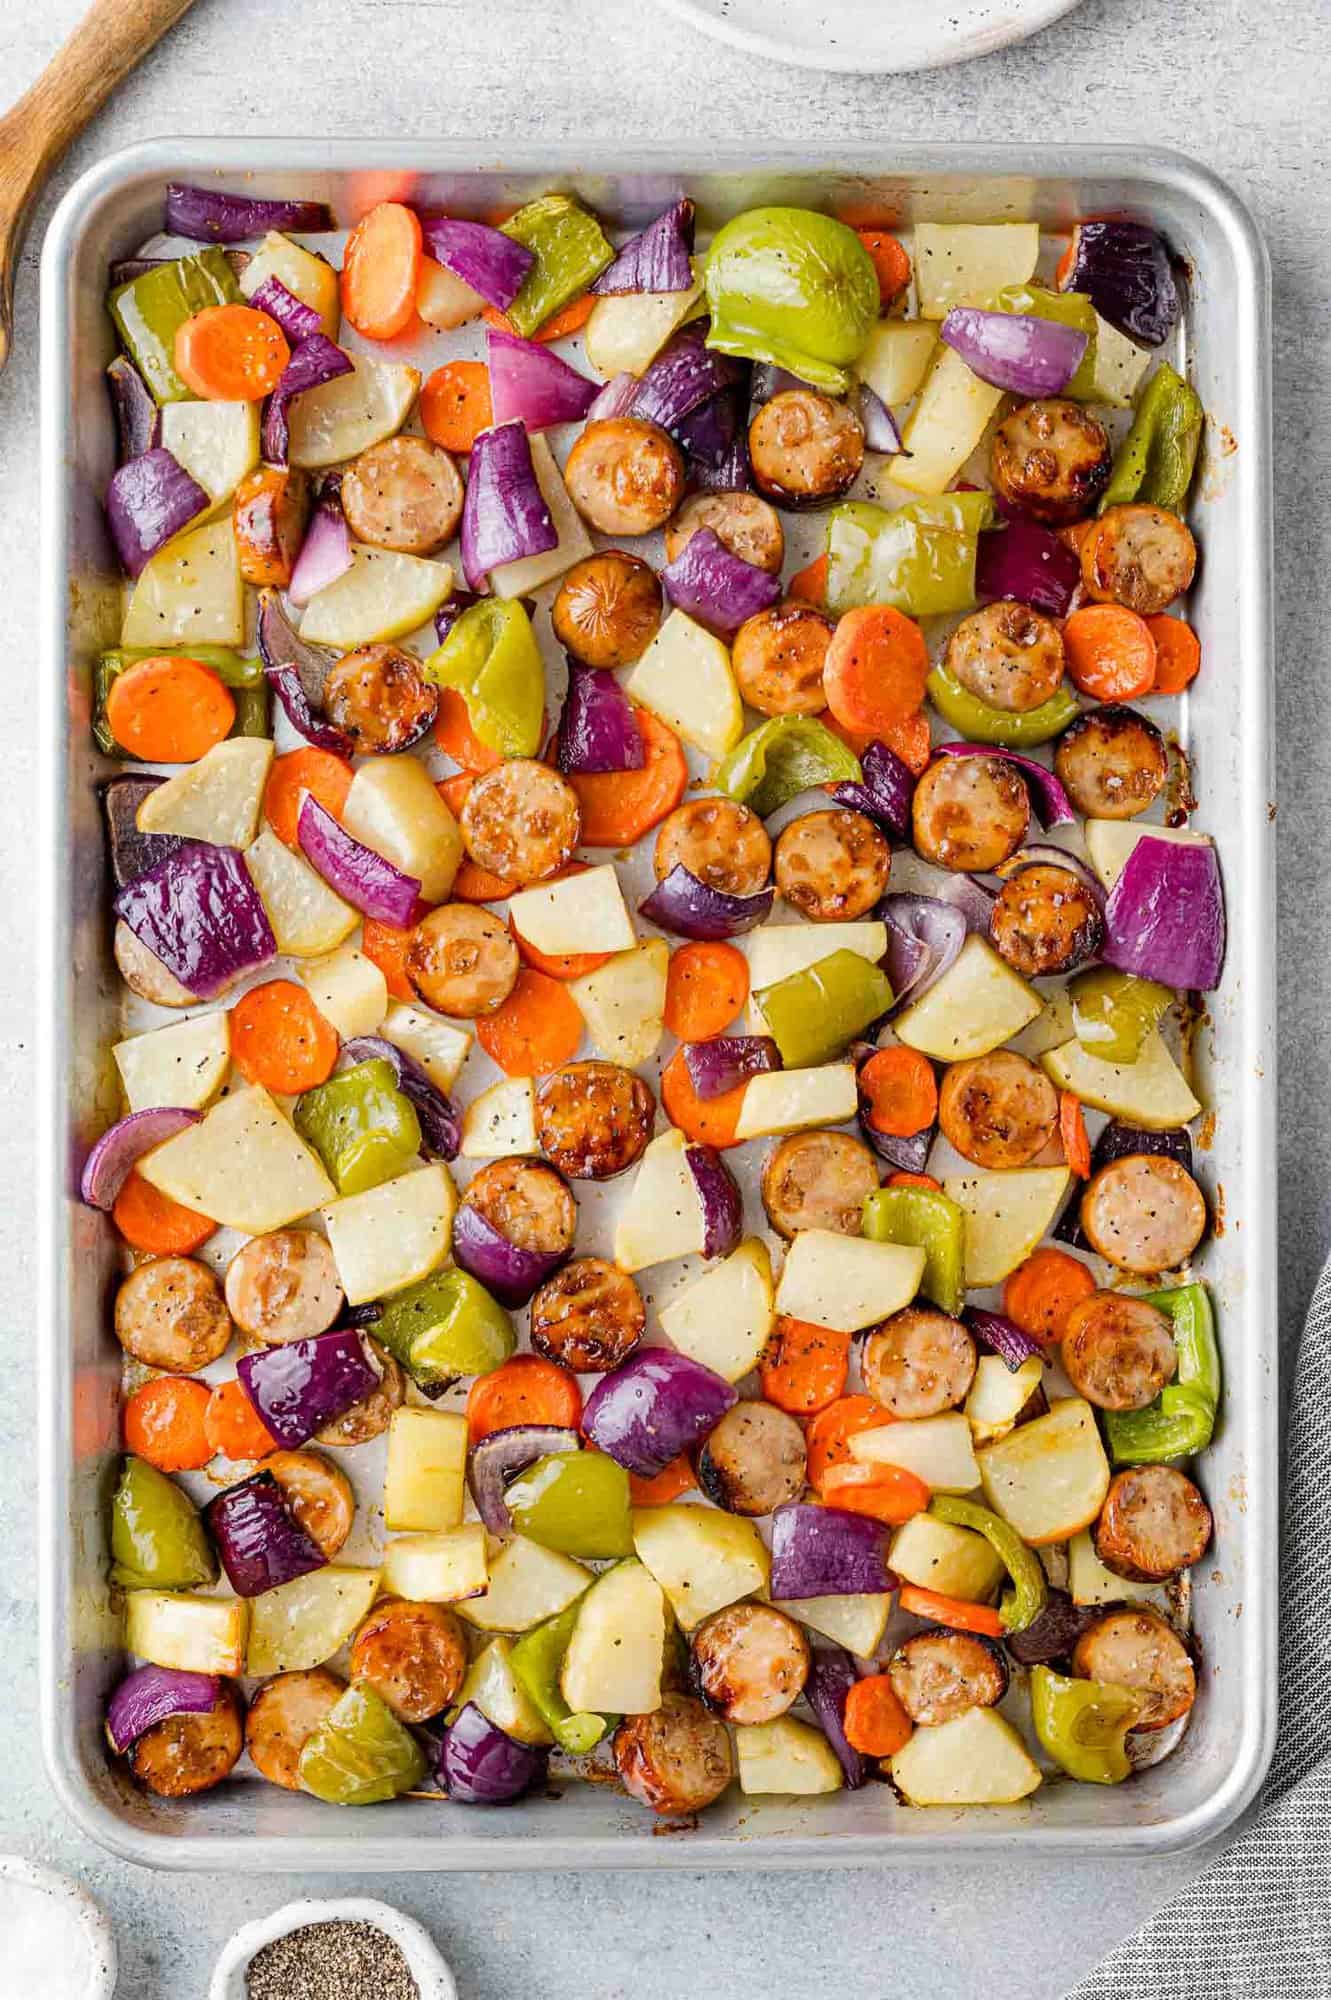 Fully cooked chicken sausage sheet pan dinner.